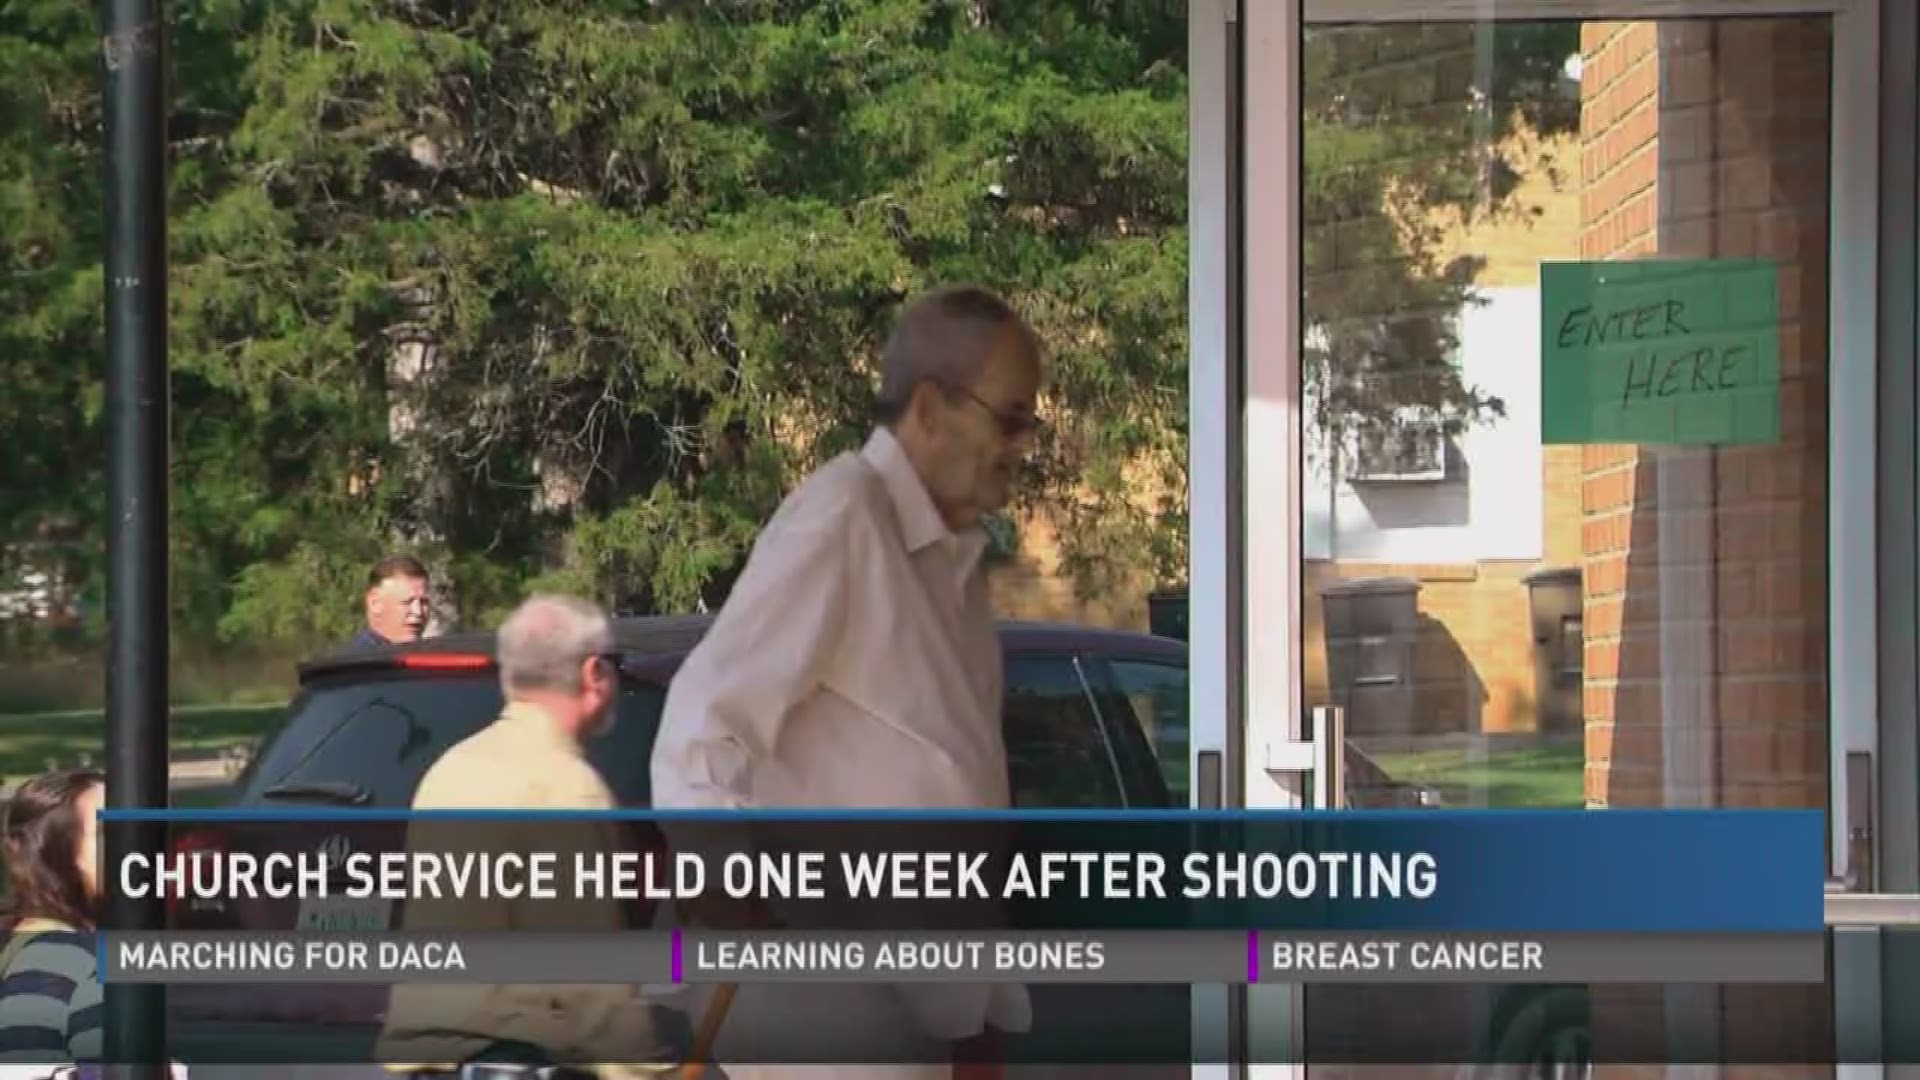 Church service was held one week after shooting in Antioch.